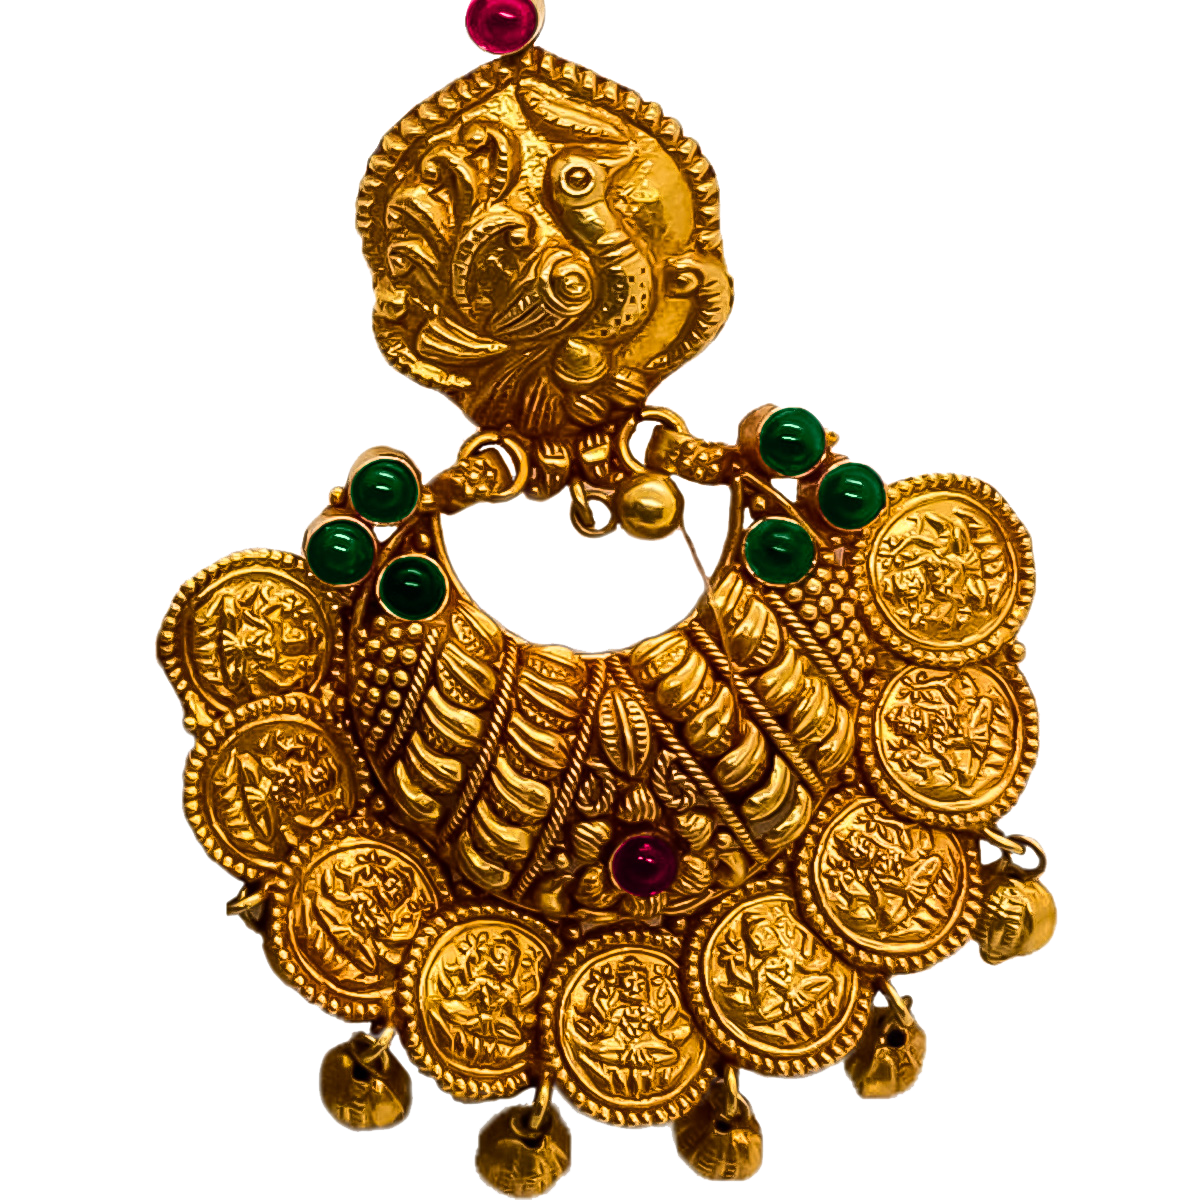 The Antique Temple Gold Earrings